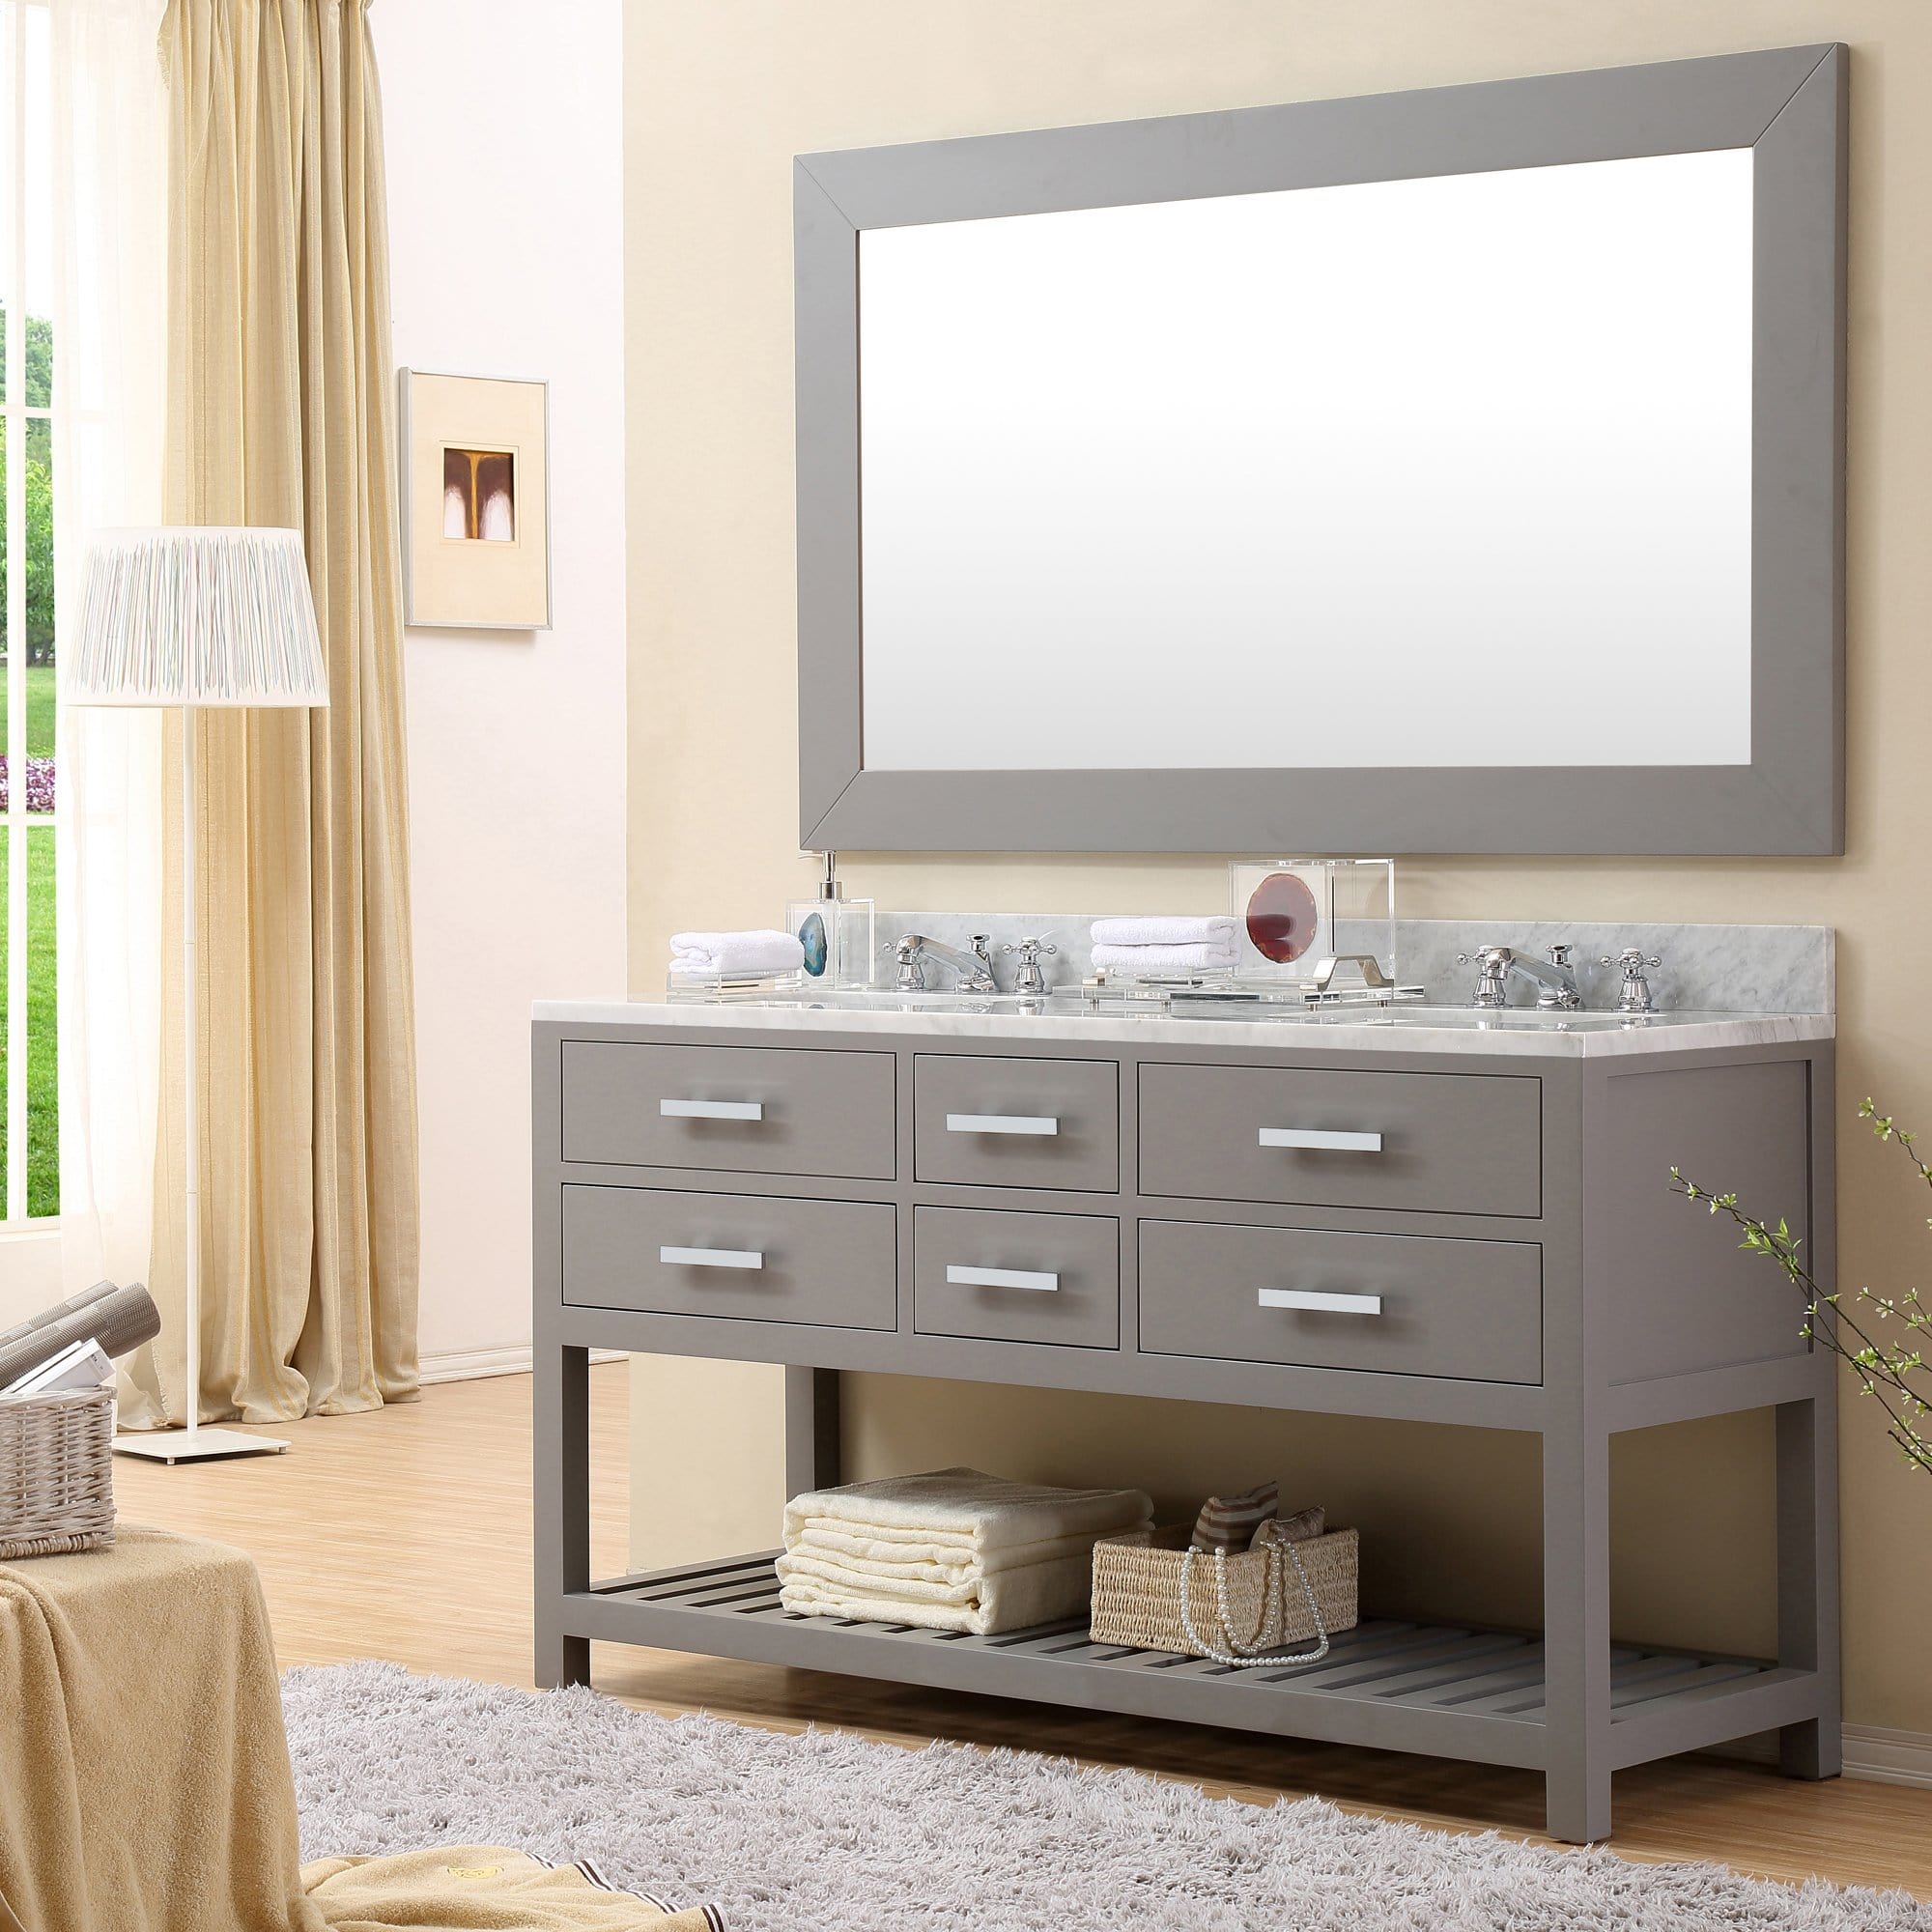 Water Creation 60 Inch Cashmere Grey Double Sink Bathroom Vanity From The Madalyn Collection - Molaix700621683230Bathroom vanityMA60CW01CG-000000000